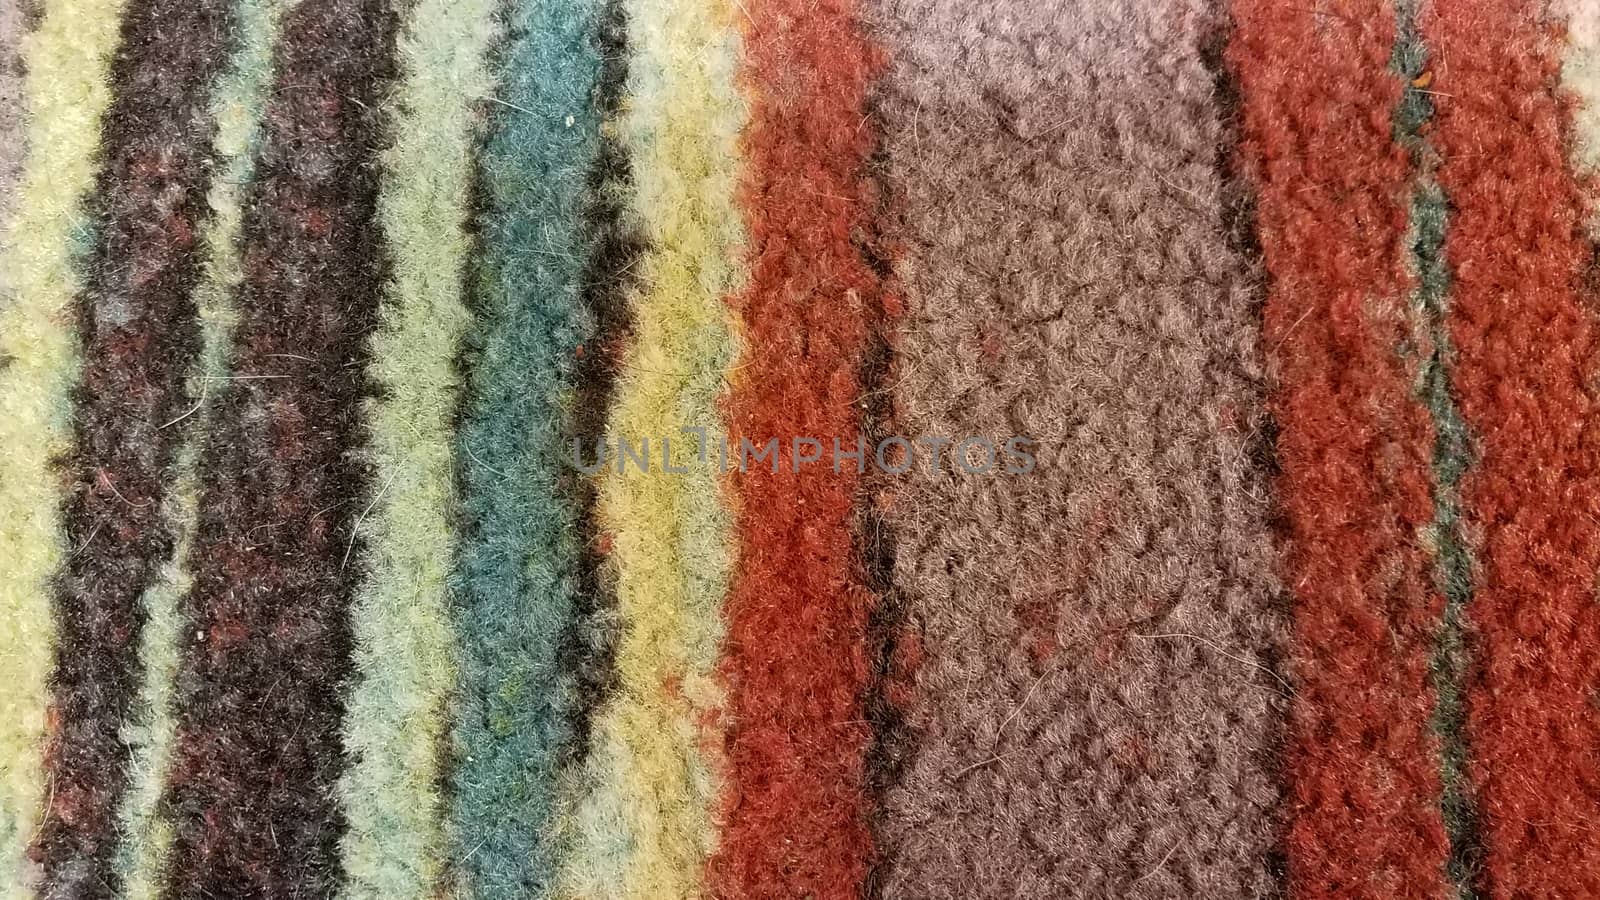 colorful carpet or rug with dog hair by stockphotofan1